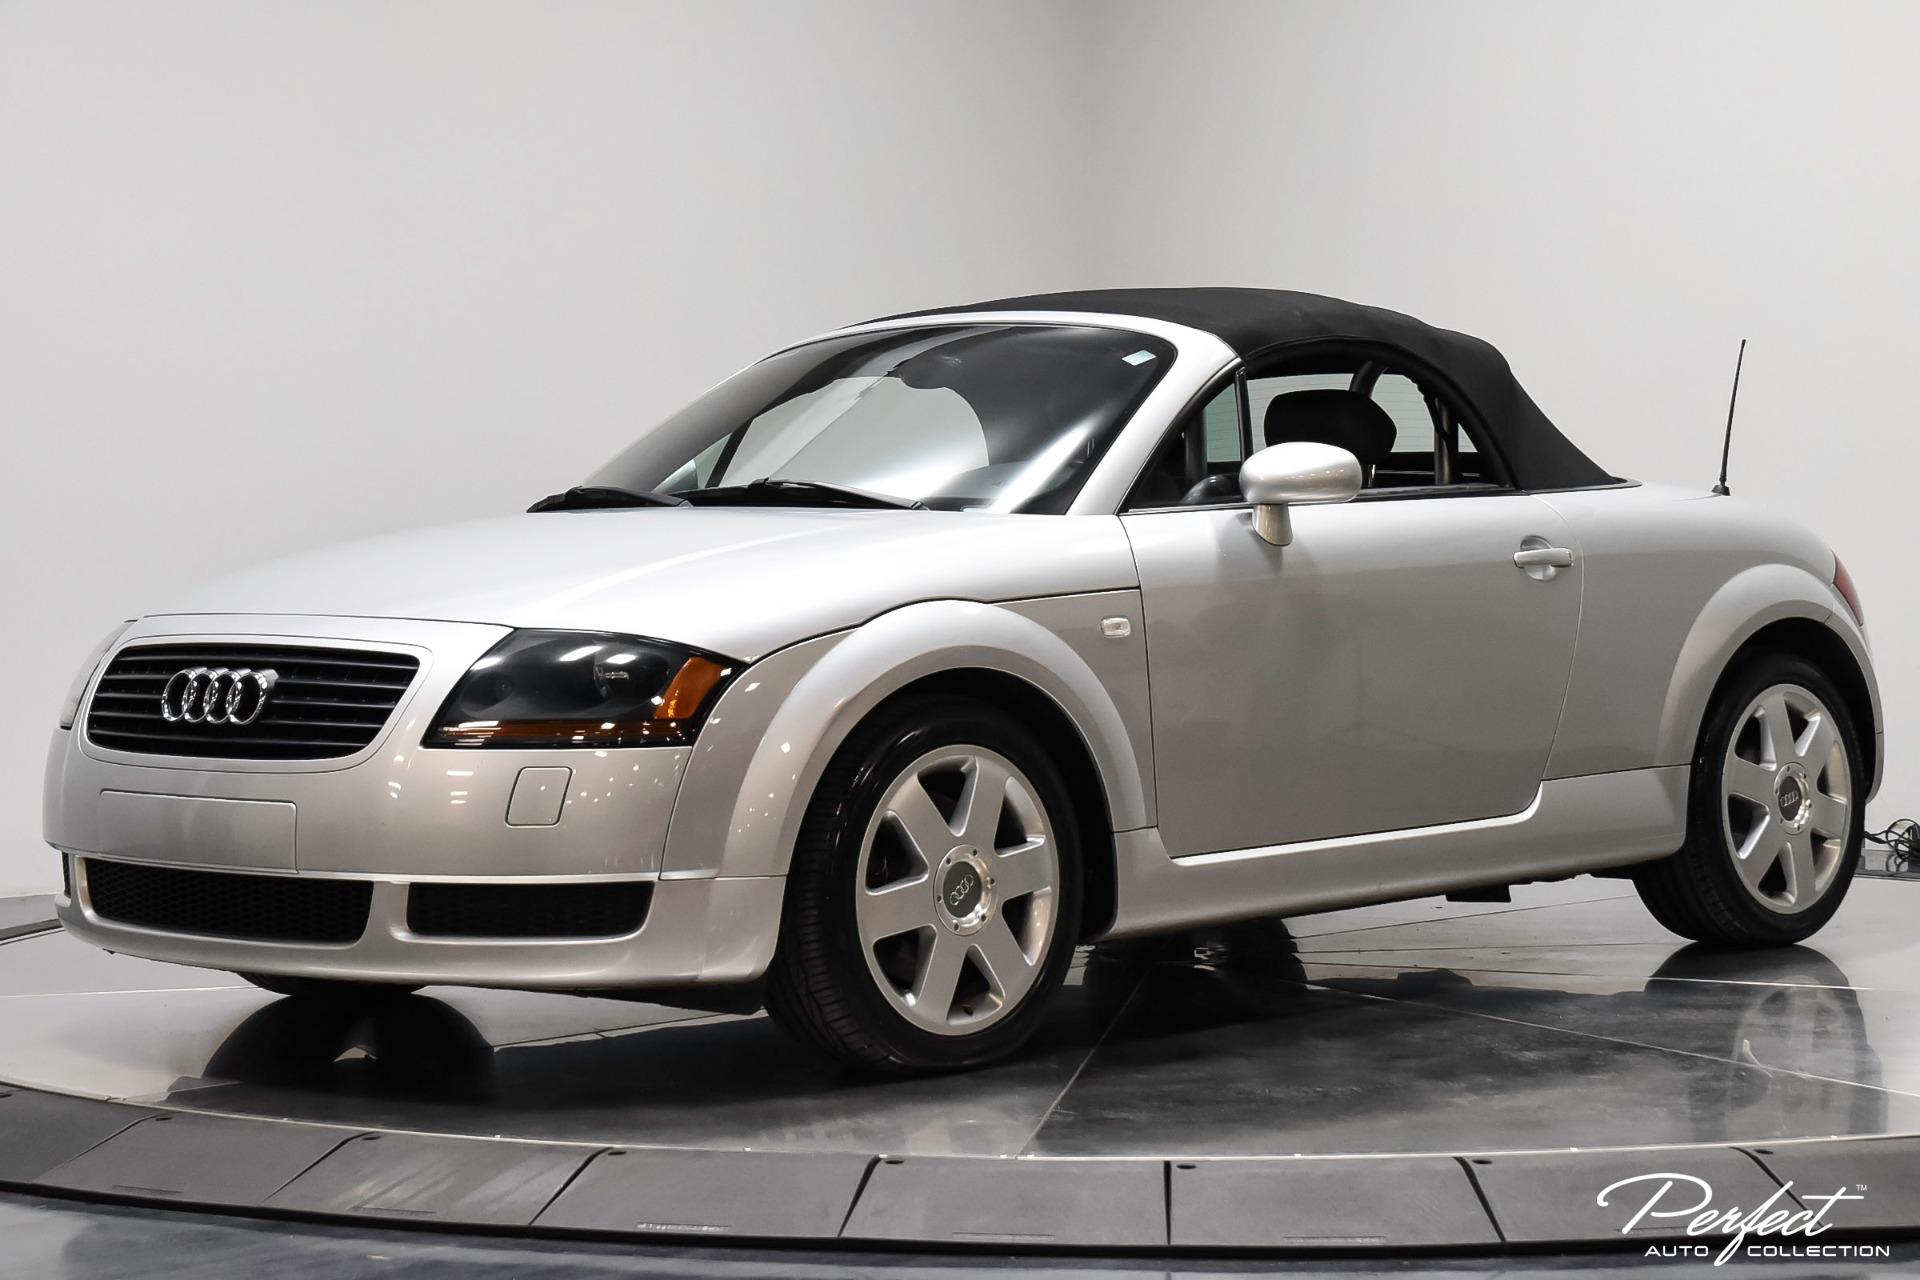 Used 2002 Audi TT 1.8T Roadster For Sale (Sold) | Perfect Auto